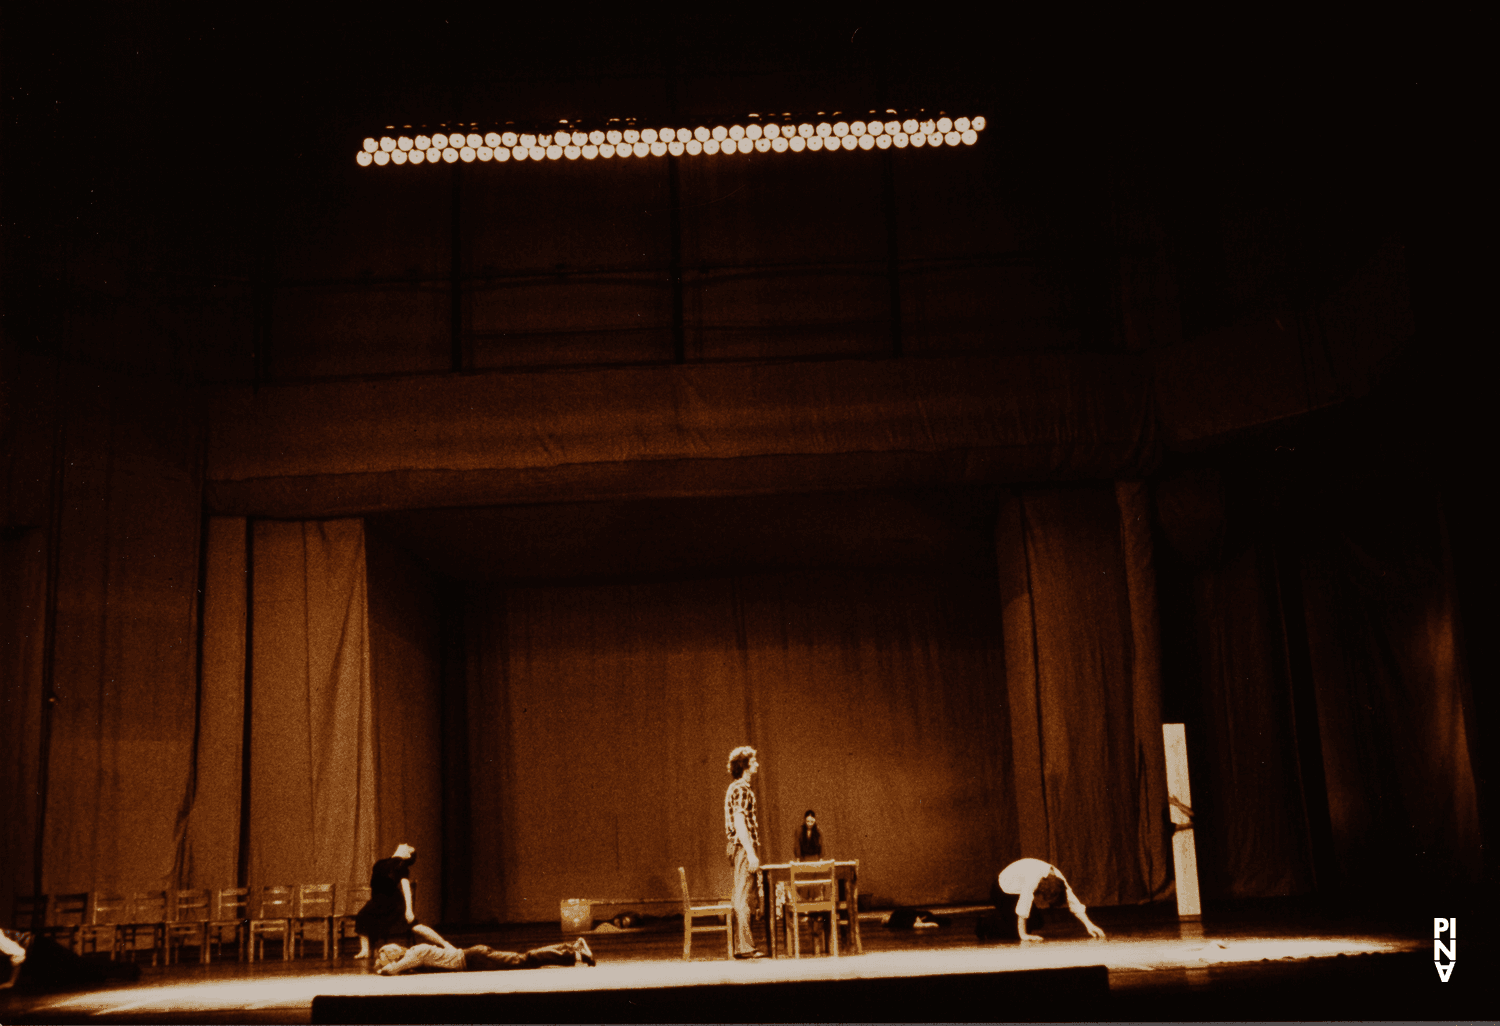 “Adagio – Five Songs by Gustav Mahler” by Pina Bausch